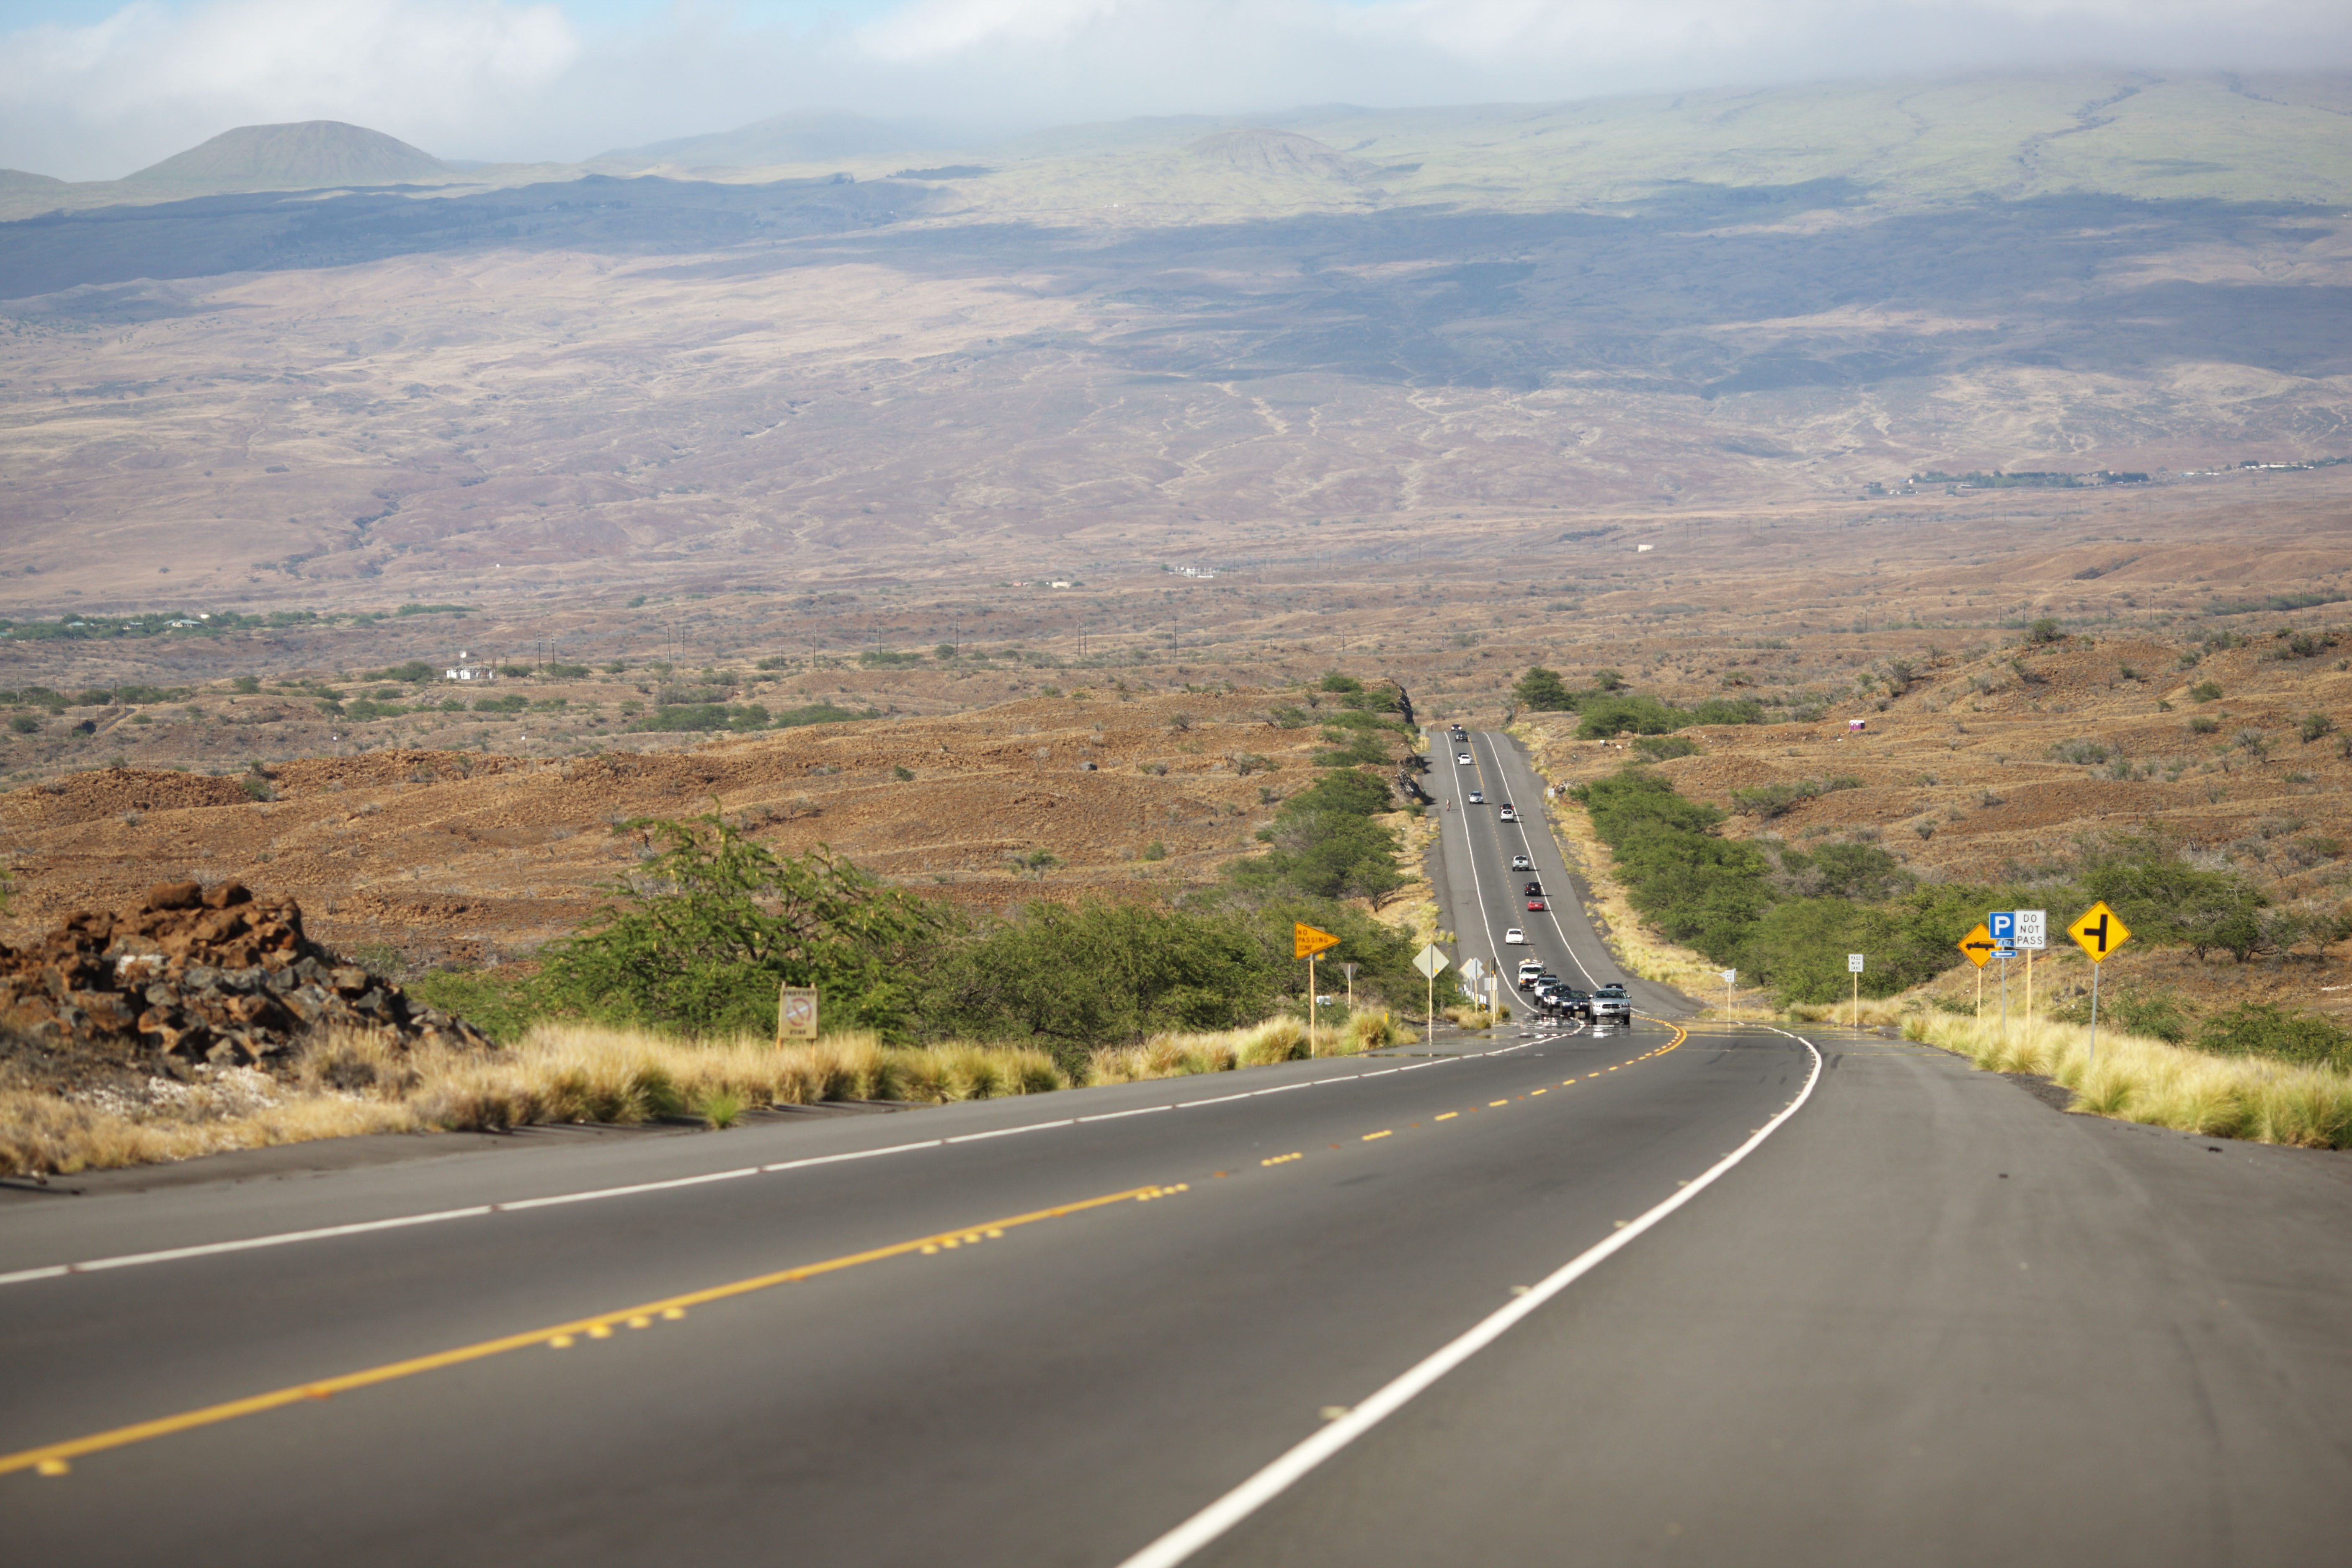 photo,material,free,landscape,picture,stock photo,Creative Commons,The road which opened up lava, highway, Asphalt, Lava, car